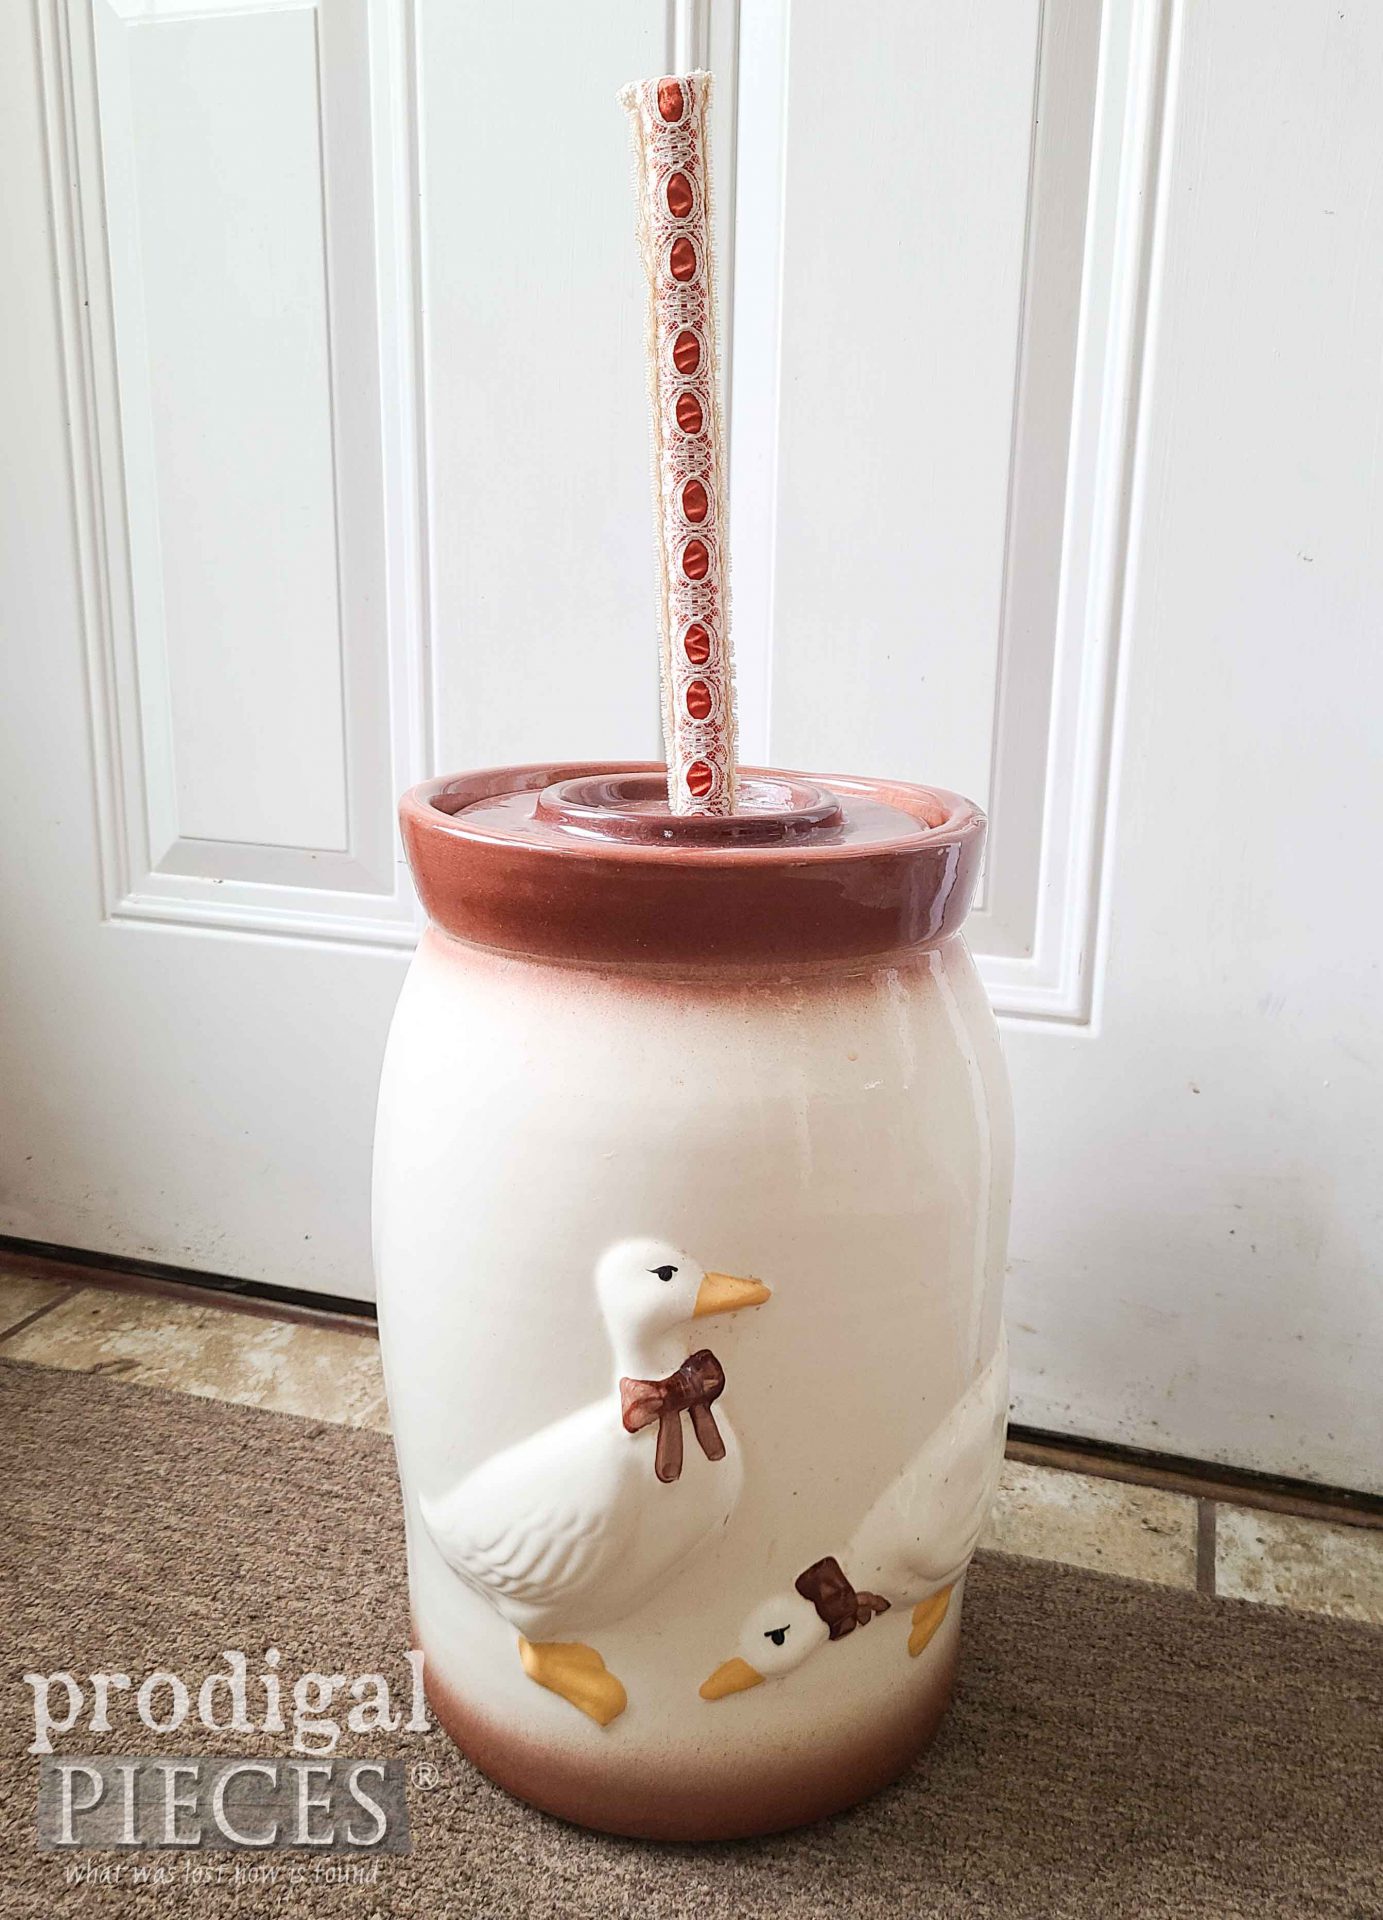 Vintage Ceramic Butter Churn with Geese | prodigalpieces.com #prodigalpieces